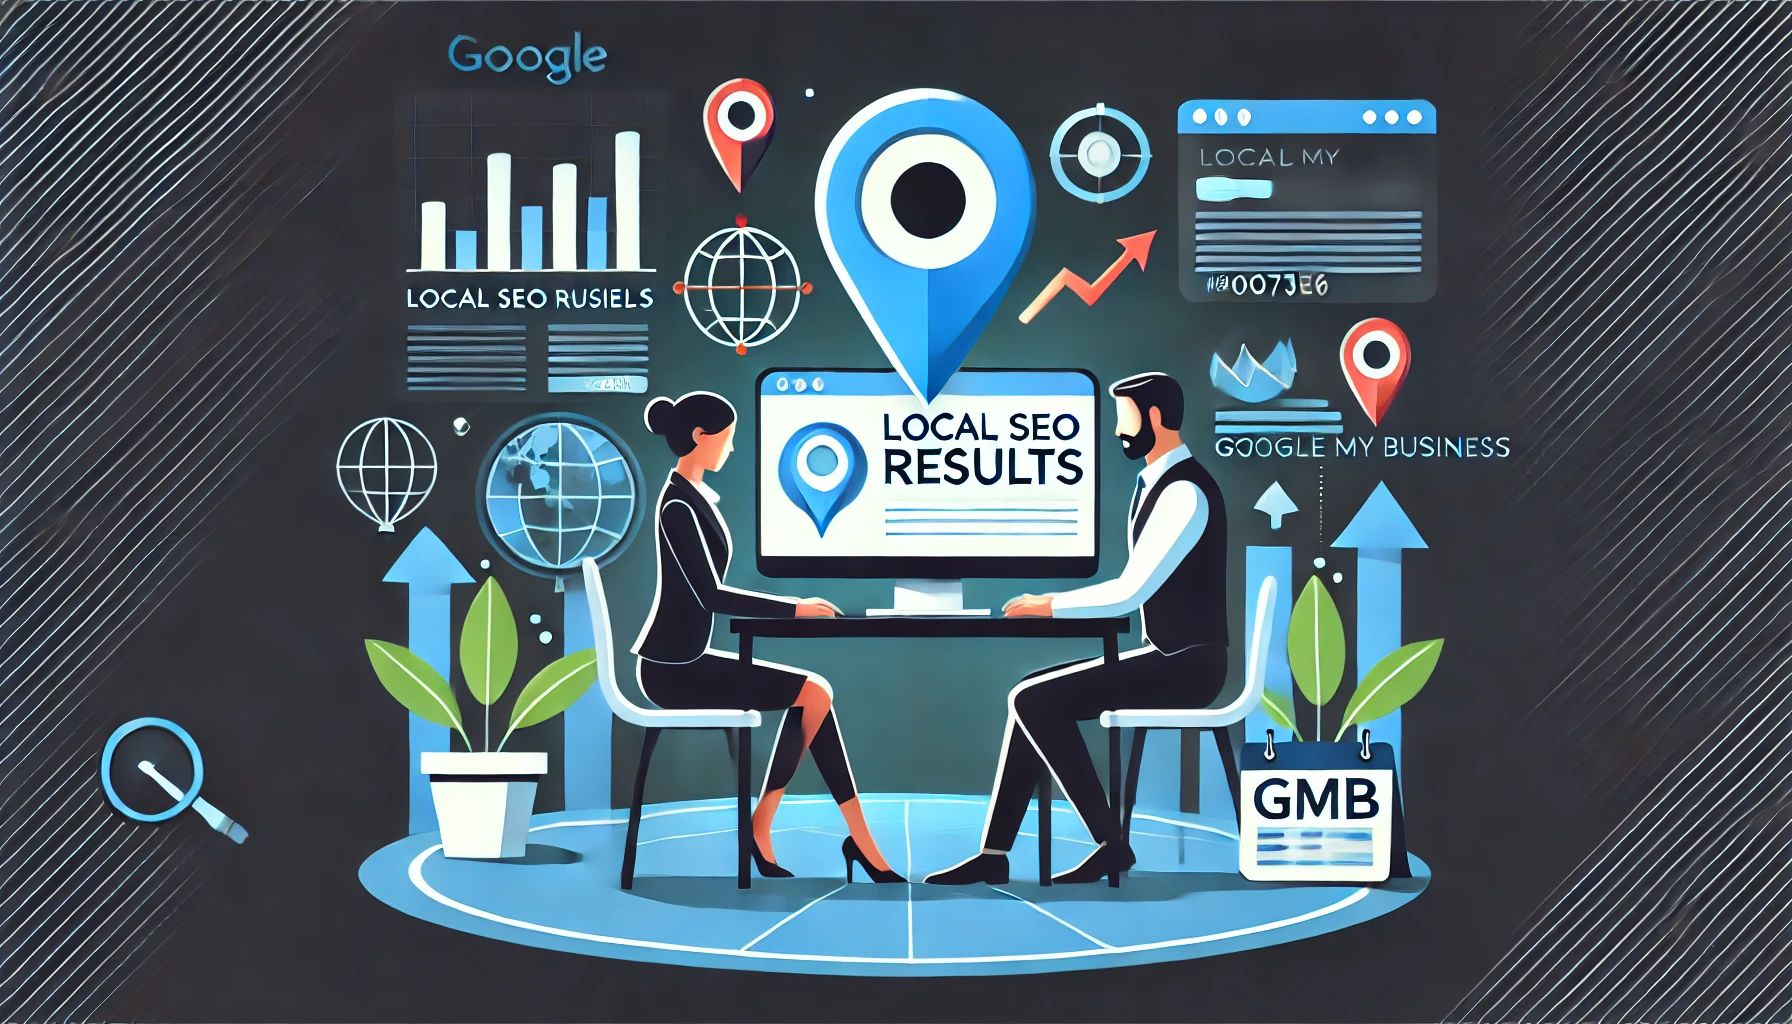 DALL·E 2024 07 07 18.13.08 Create a simple and eye catching image for Local SEO Results featuring a technology theme. Include a professional man and woman working together on 